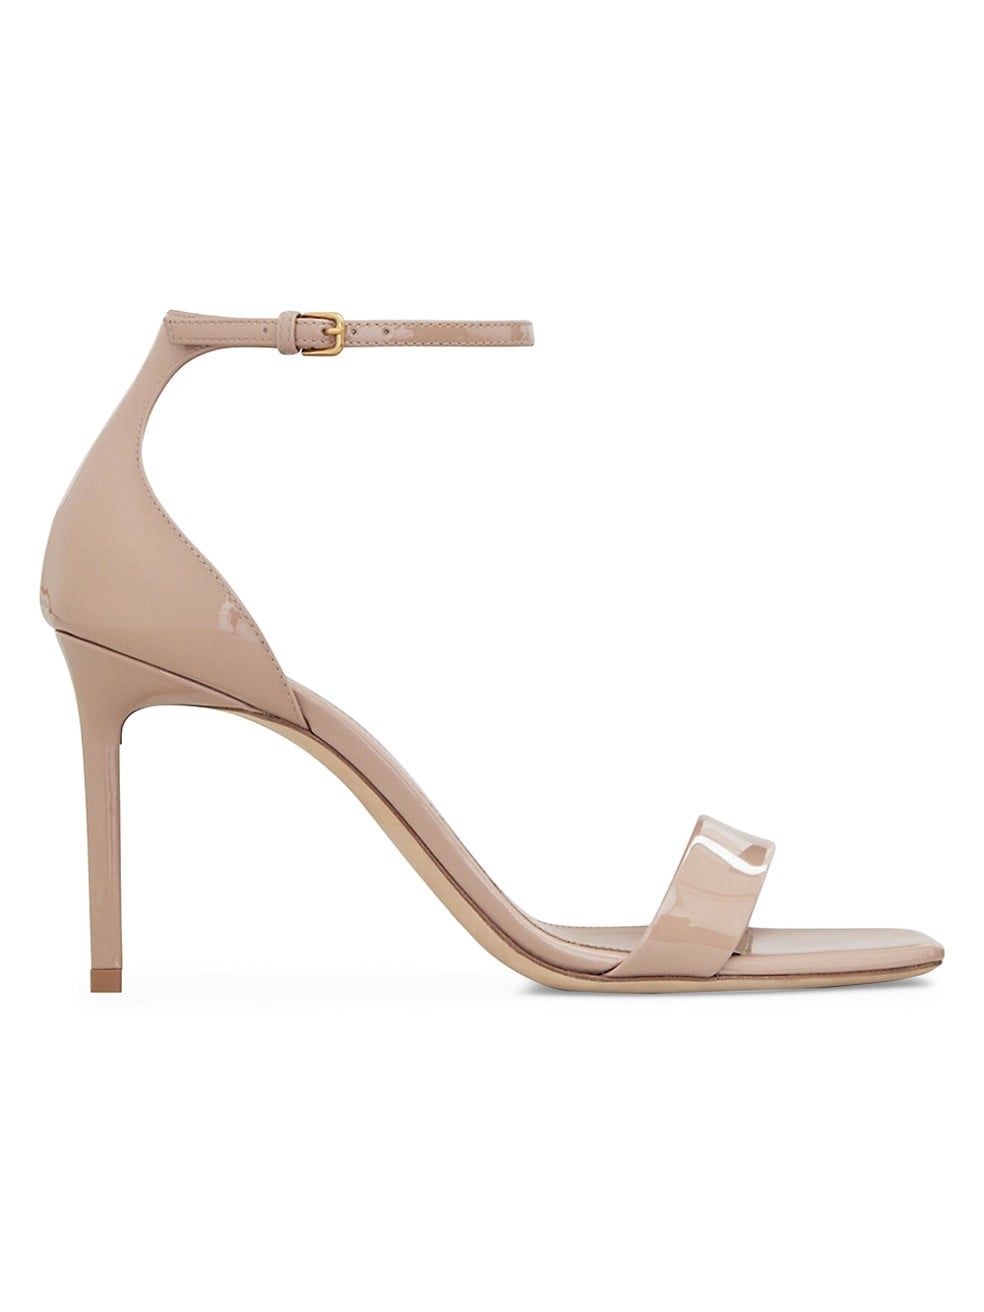 Amber Sandals in Patent Leather | Saks Fifth Avenue